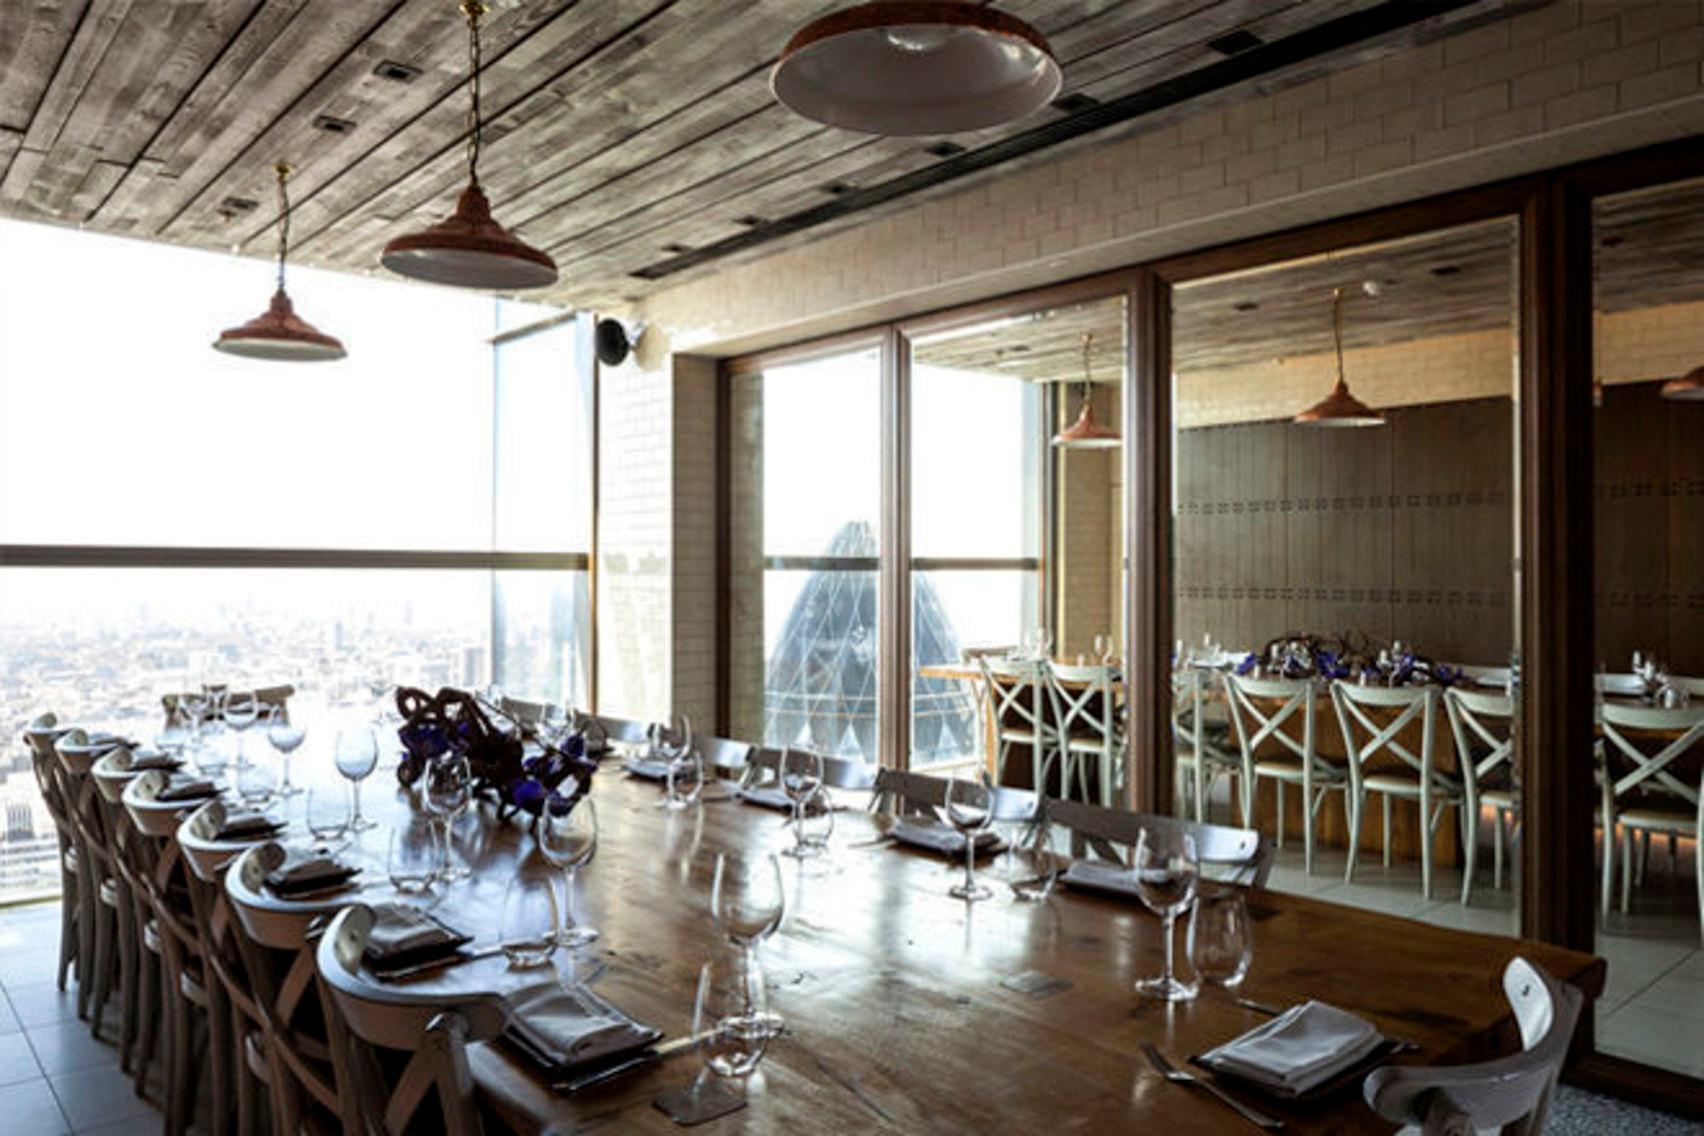 Private Dining Room - Breakfast, Duck & Waffle photo #1